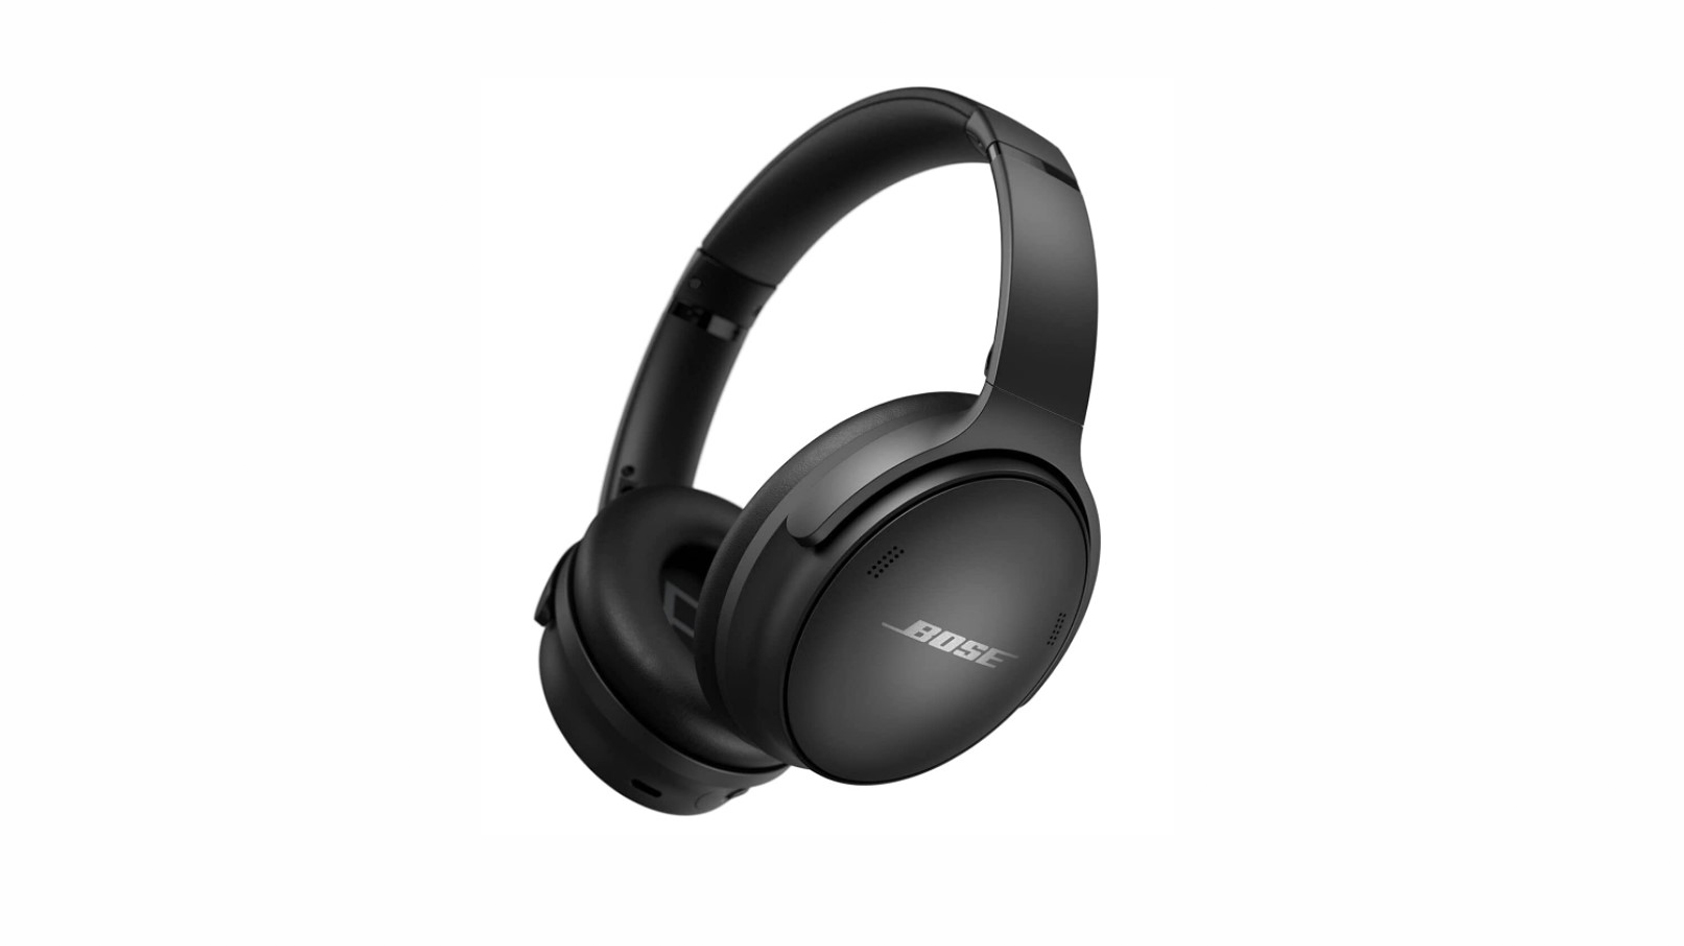 Product shot of Bose QuietComfort 45 headset from the side.